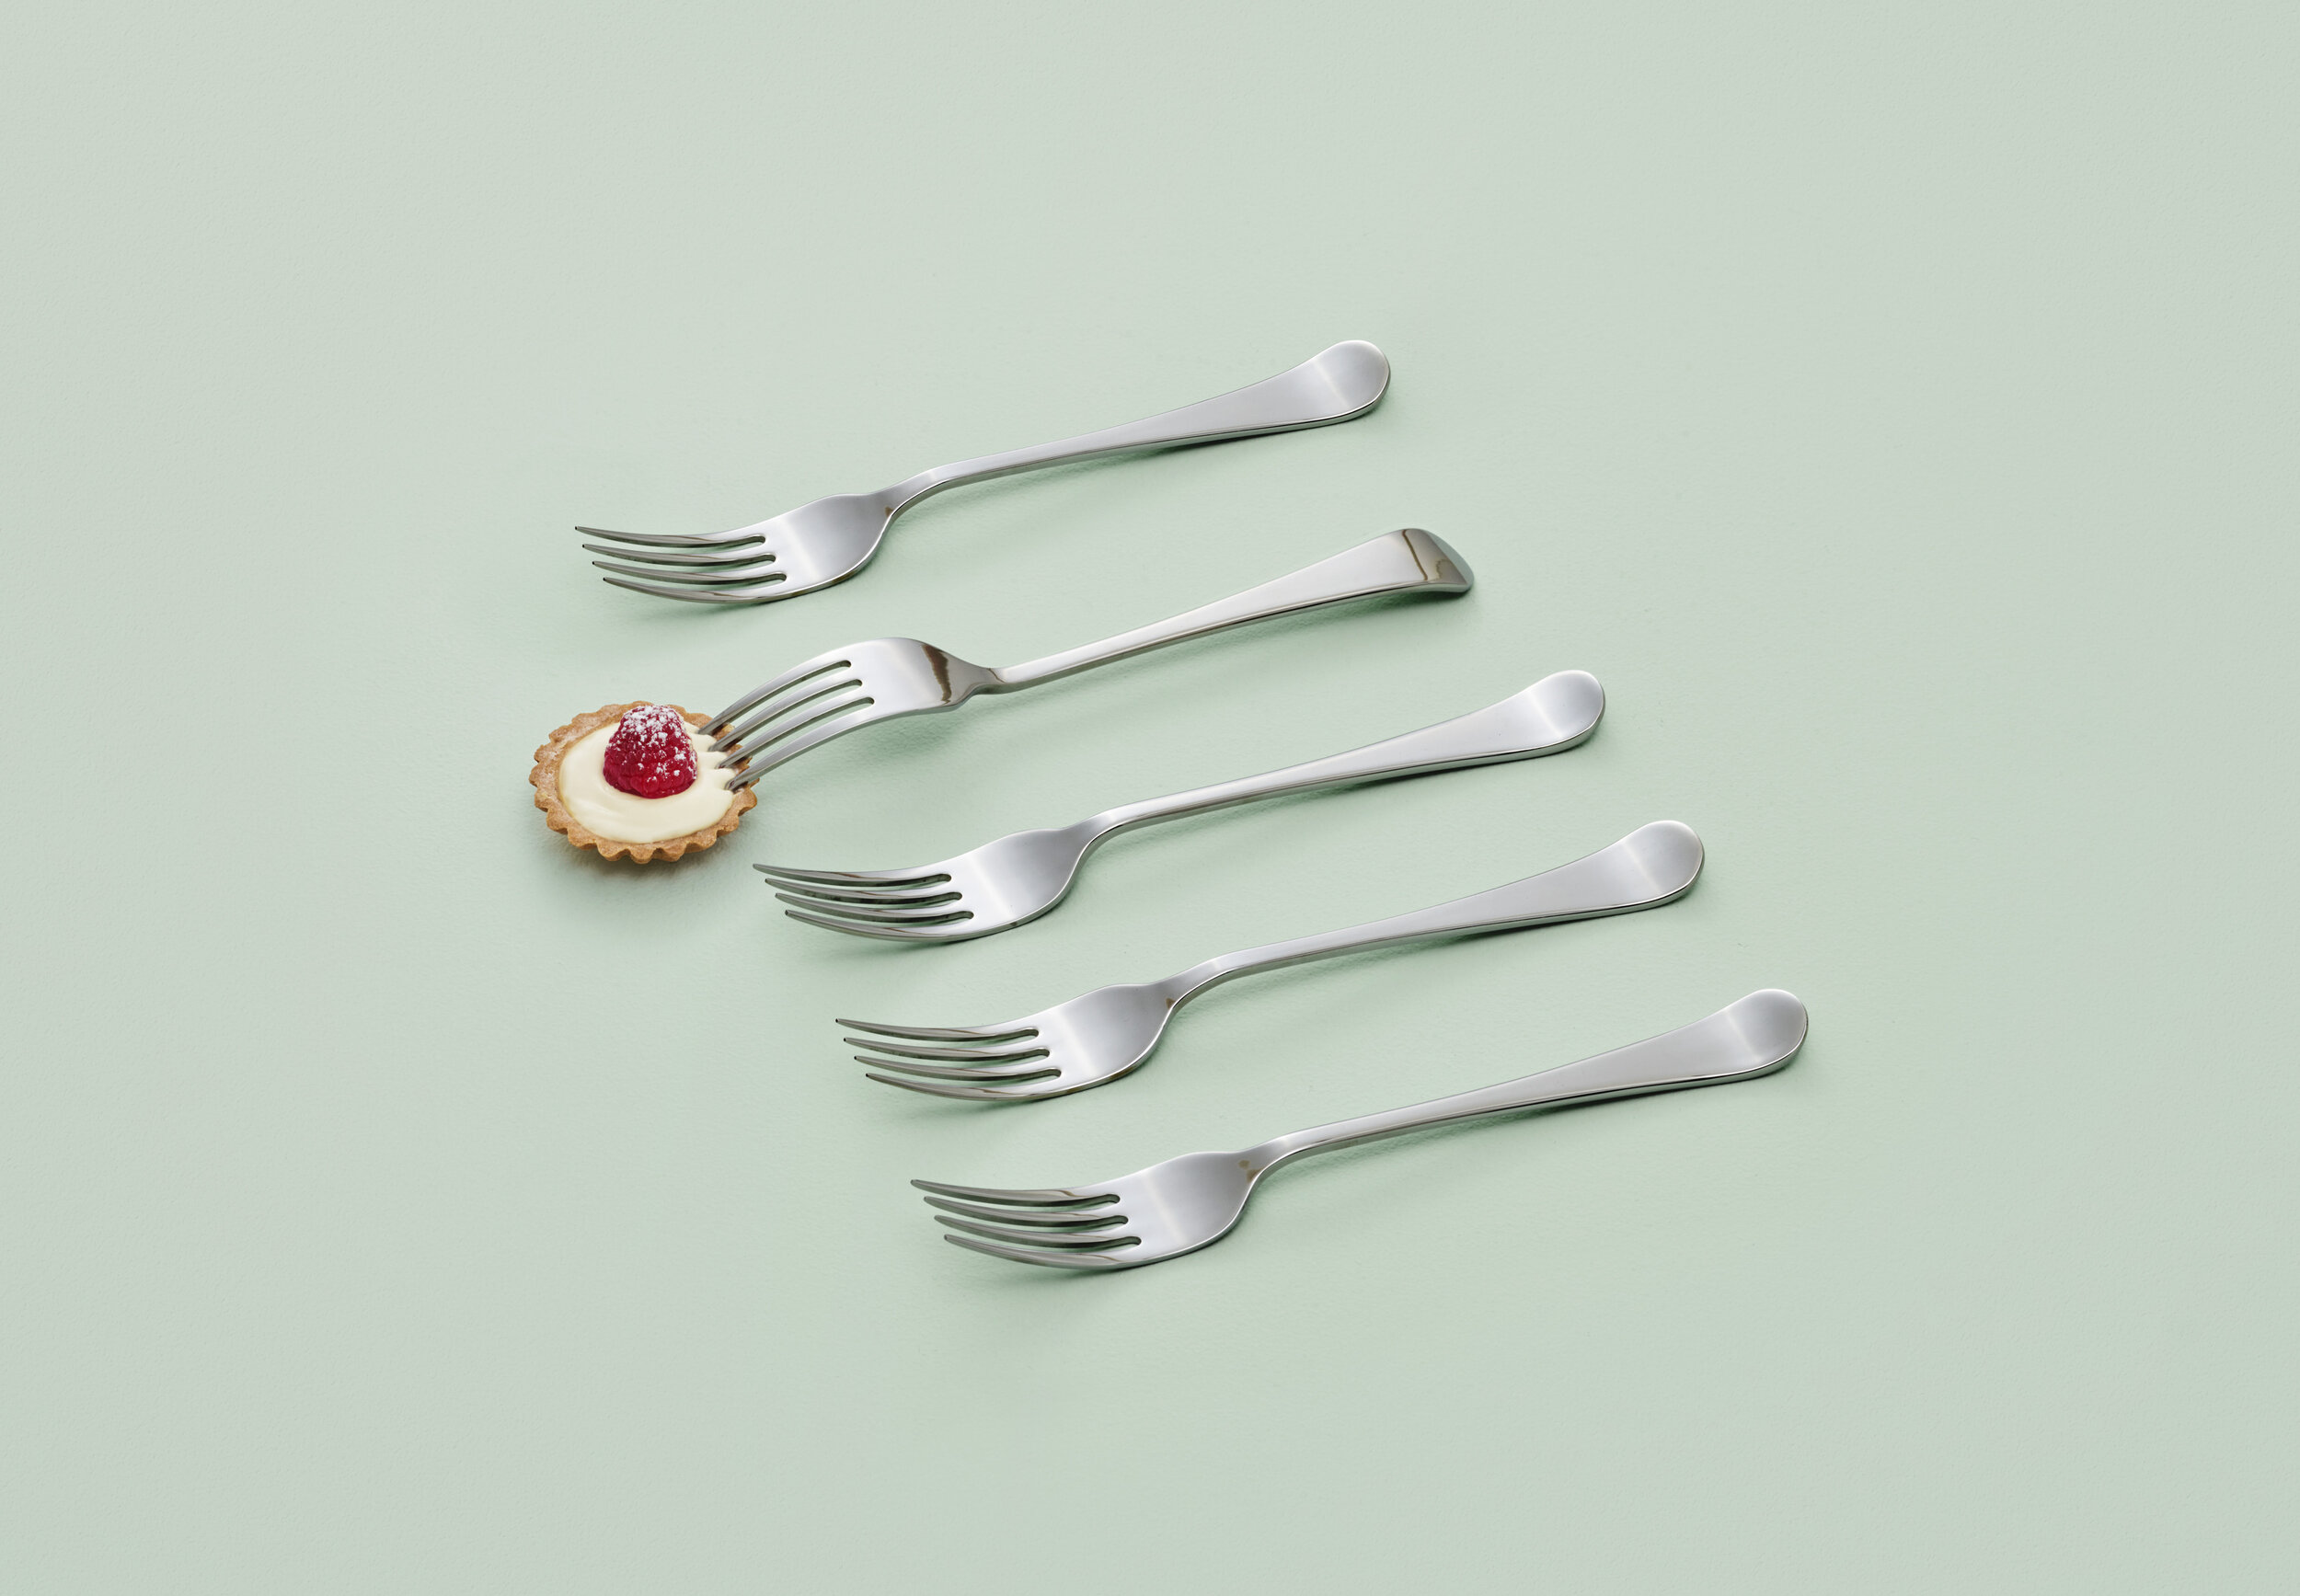 Crate and barrel forks with mini pie.jpg